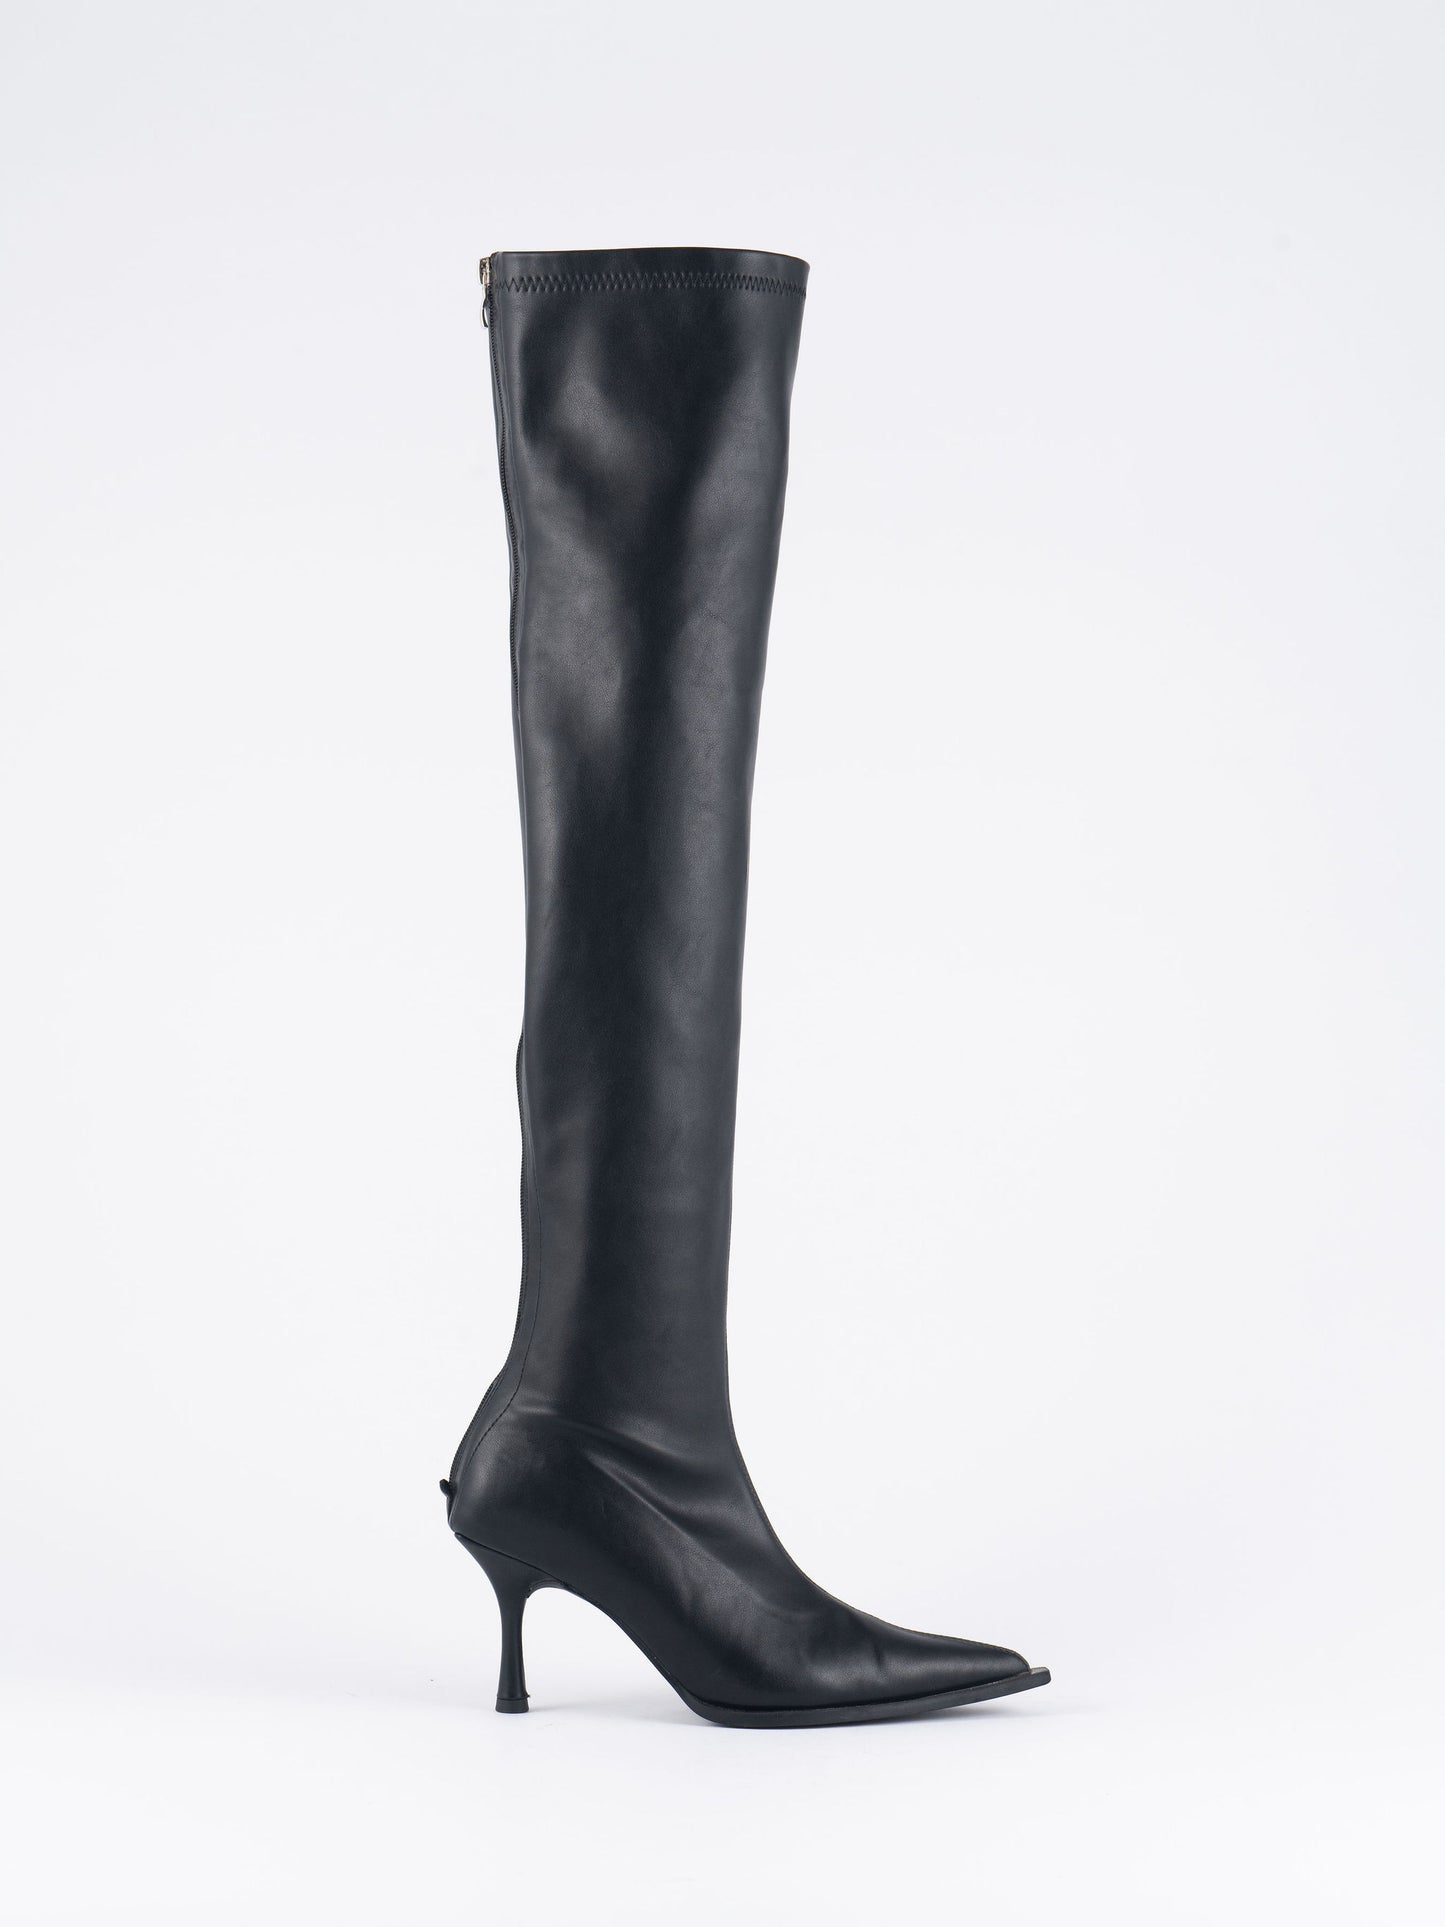 Pairs High Over the Knee High Boots - Black